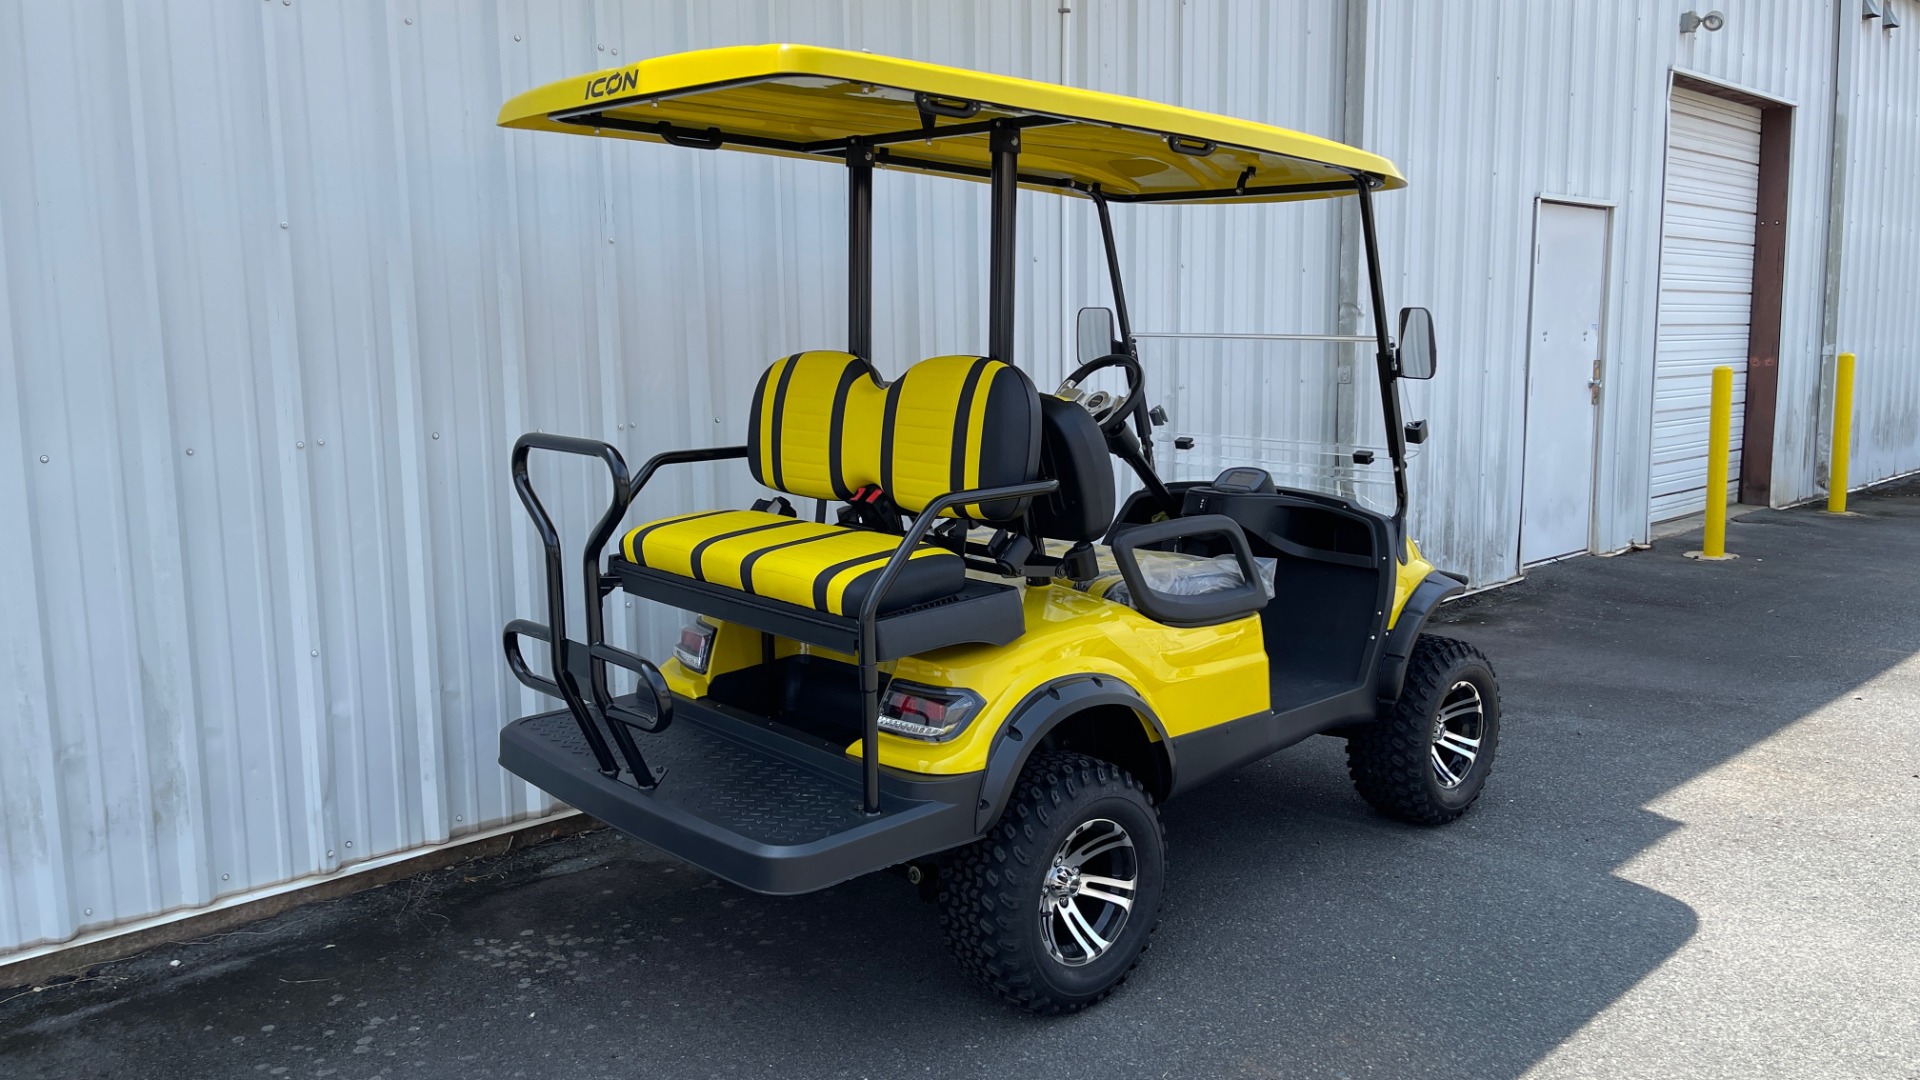 Used 2021 ICON i40L LIFTED ELECTRIC CAR / 4-PASSENGER GOLF CART / 25MPH / NEW / 1-MILE for sale Sold at Formula Imports in Charlotte NC 28227 6